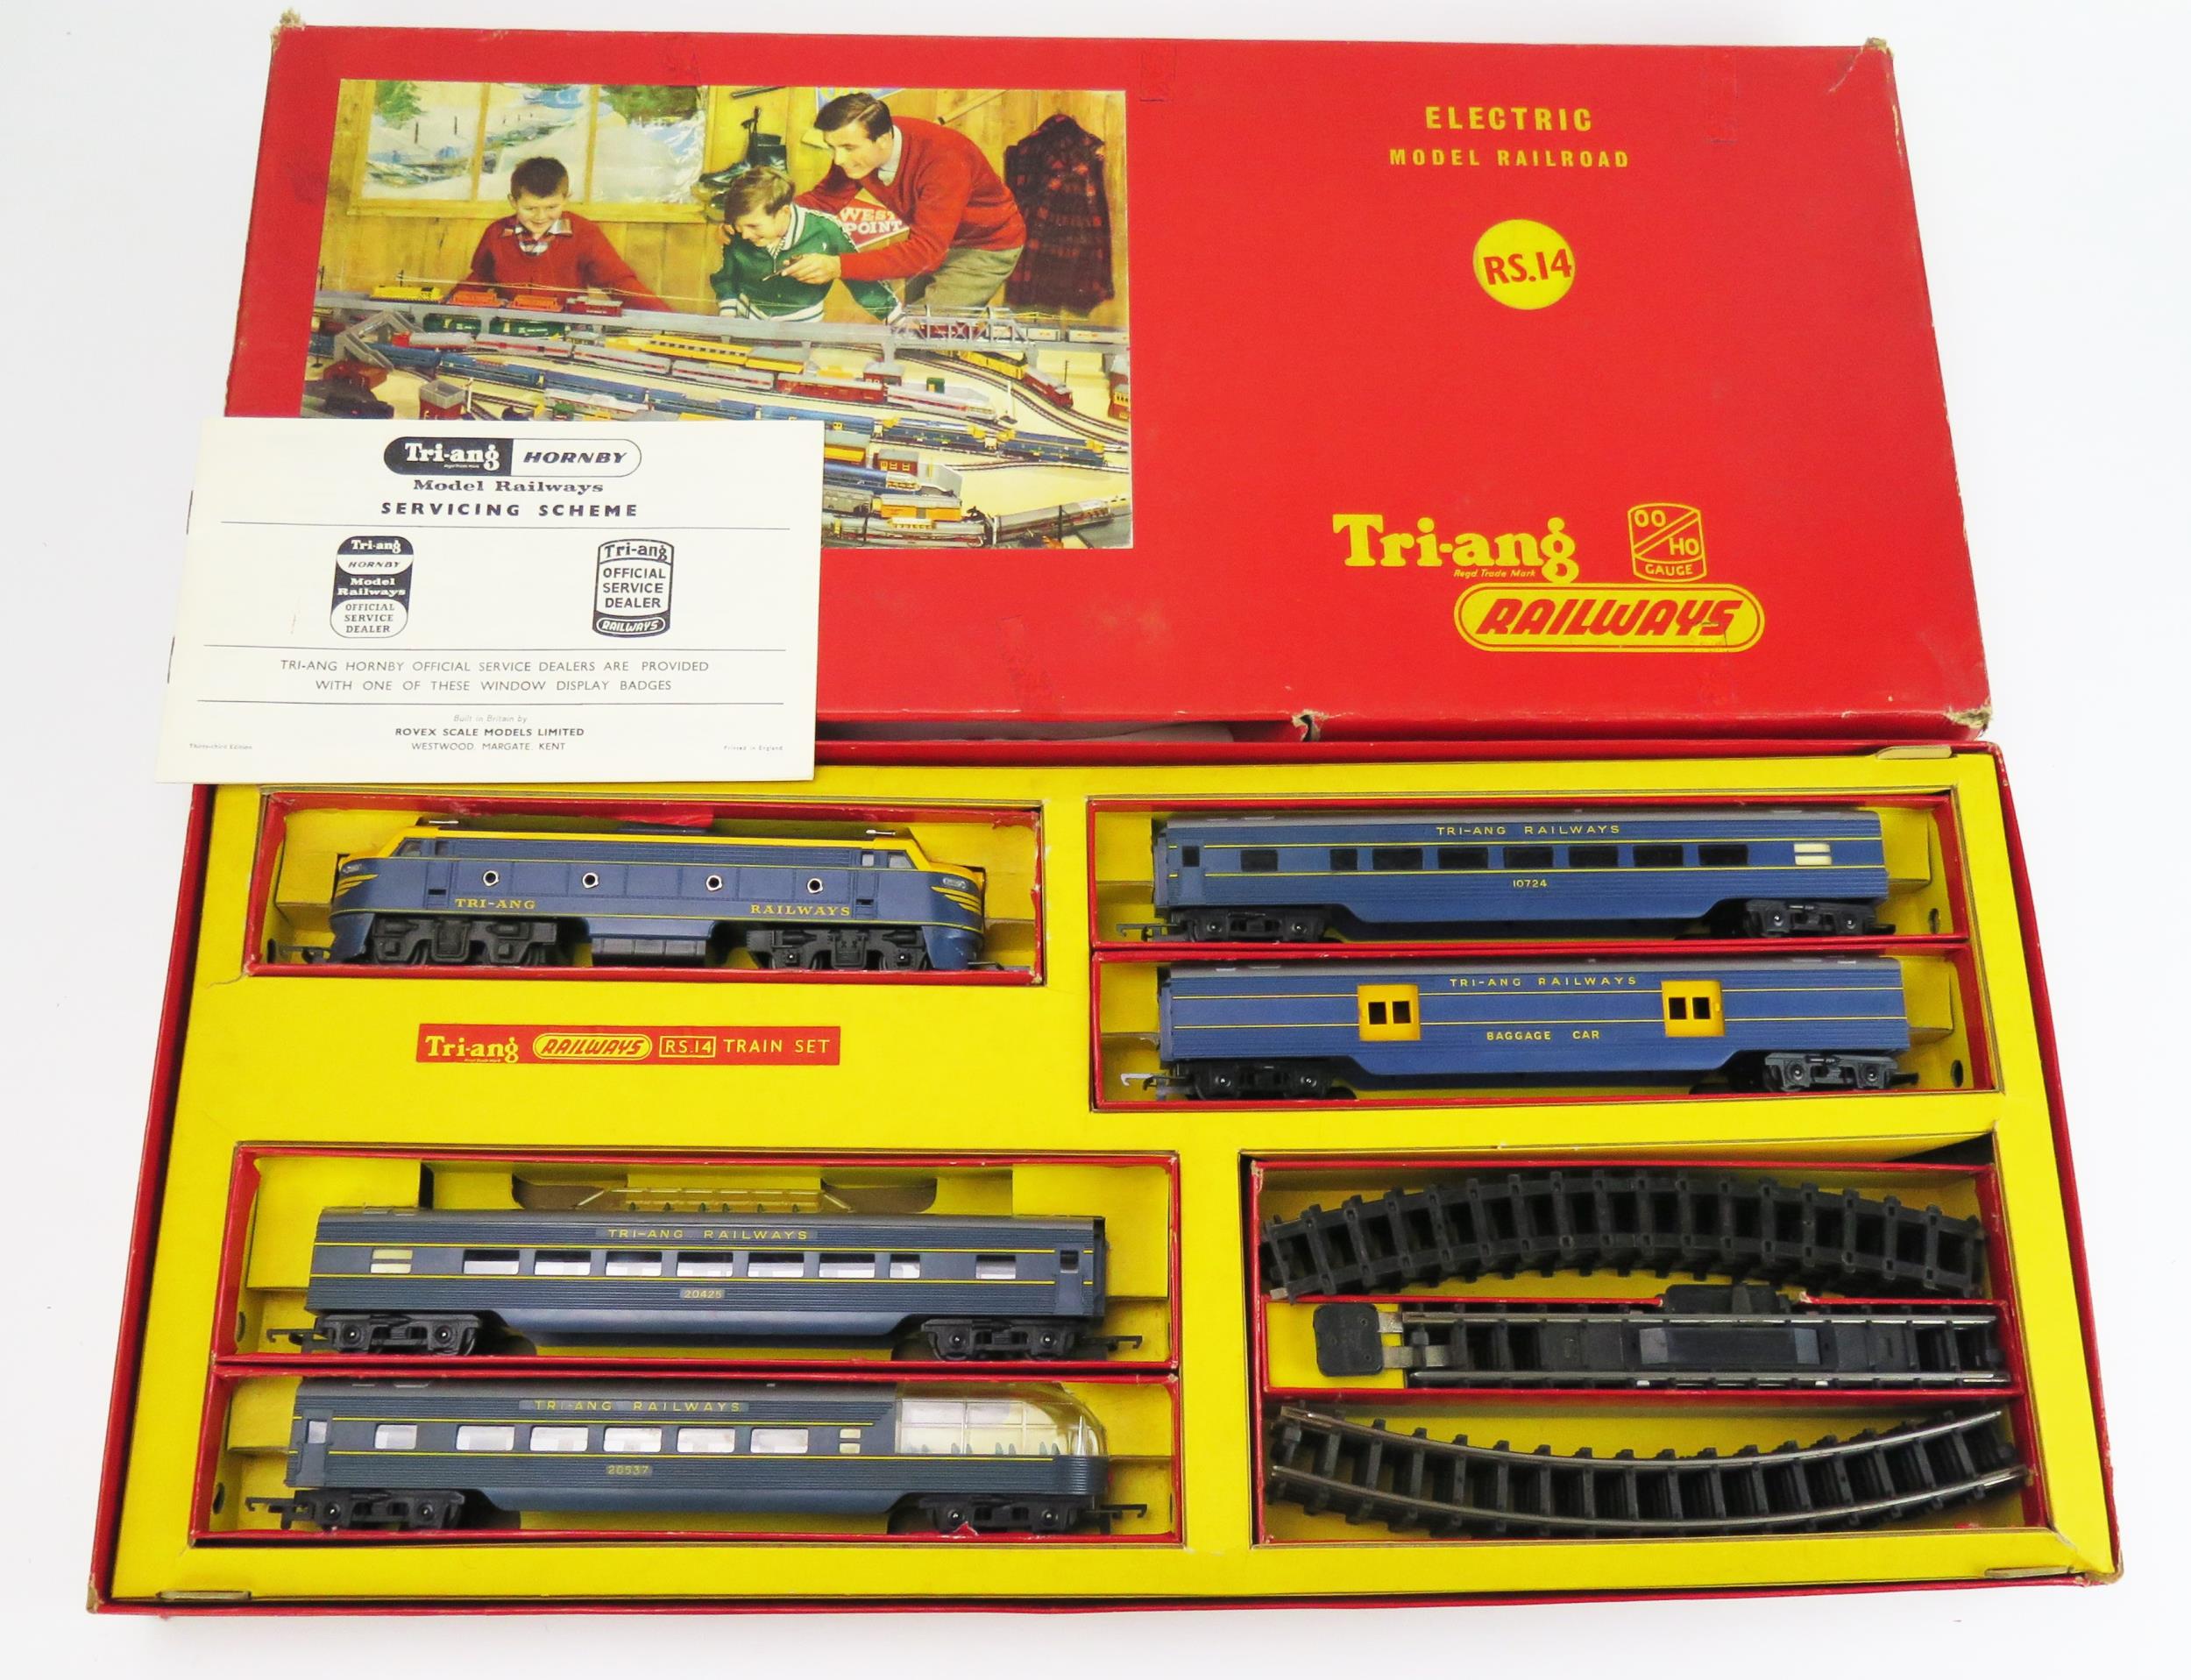 Triang Railways OO Gauge RS14 Transcontinental Passenger Train Set in blue/yellow with Double